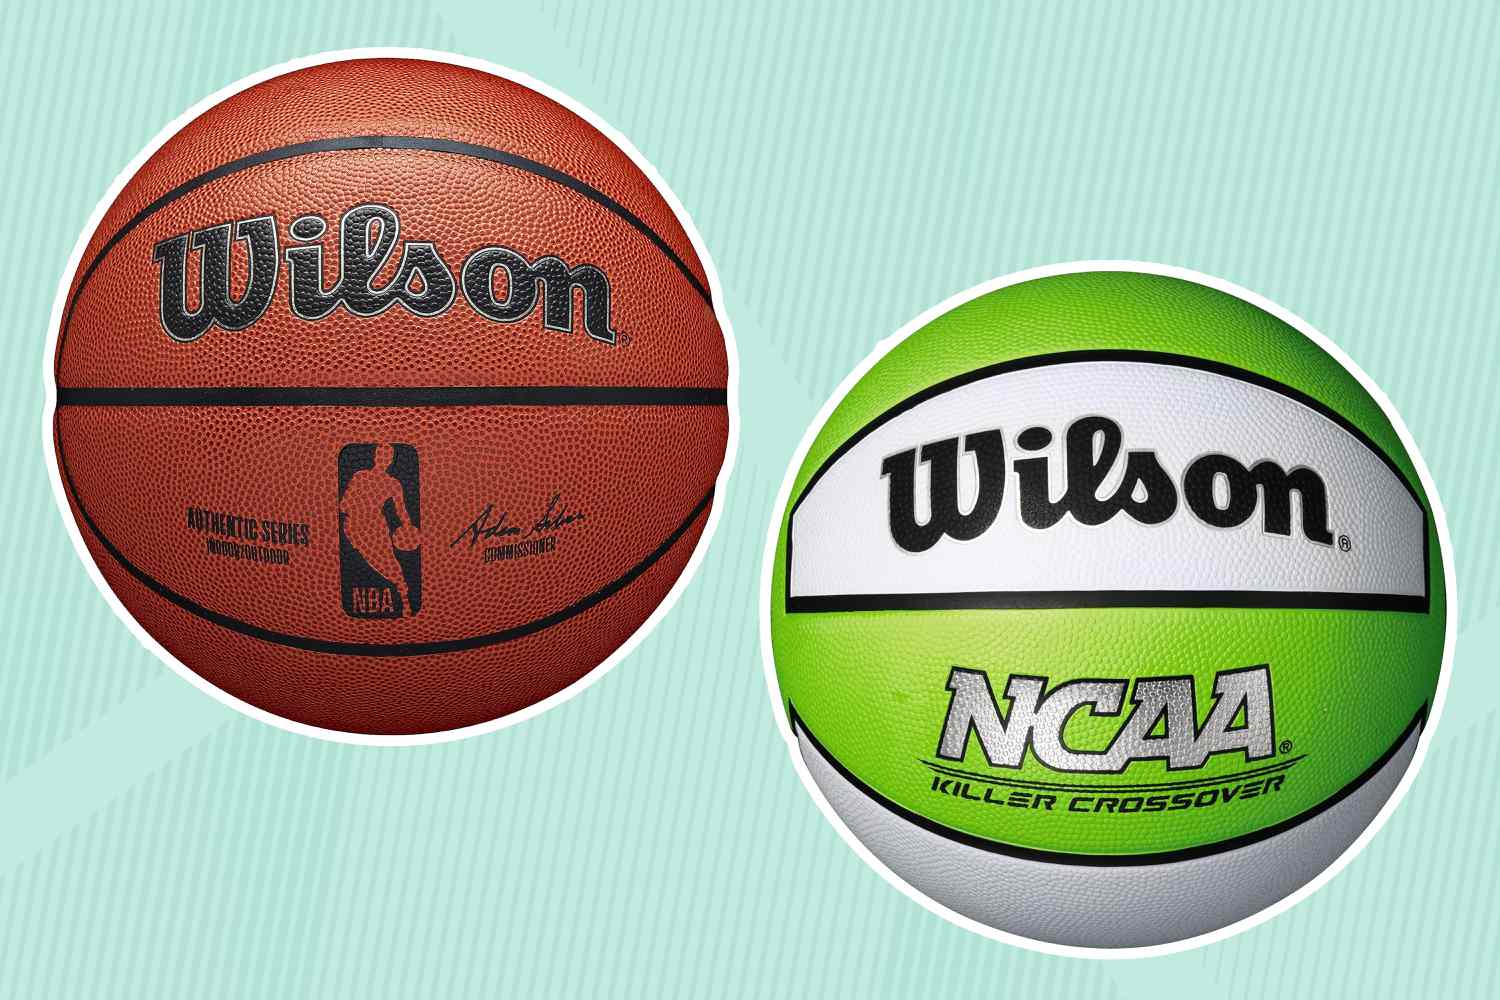 A selection of recommended basketballs atop a decorative blue background